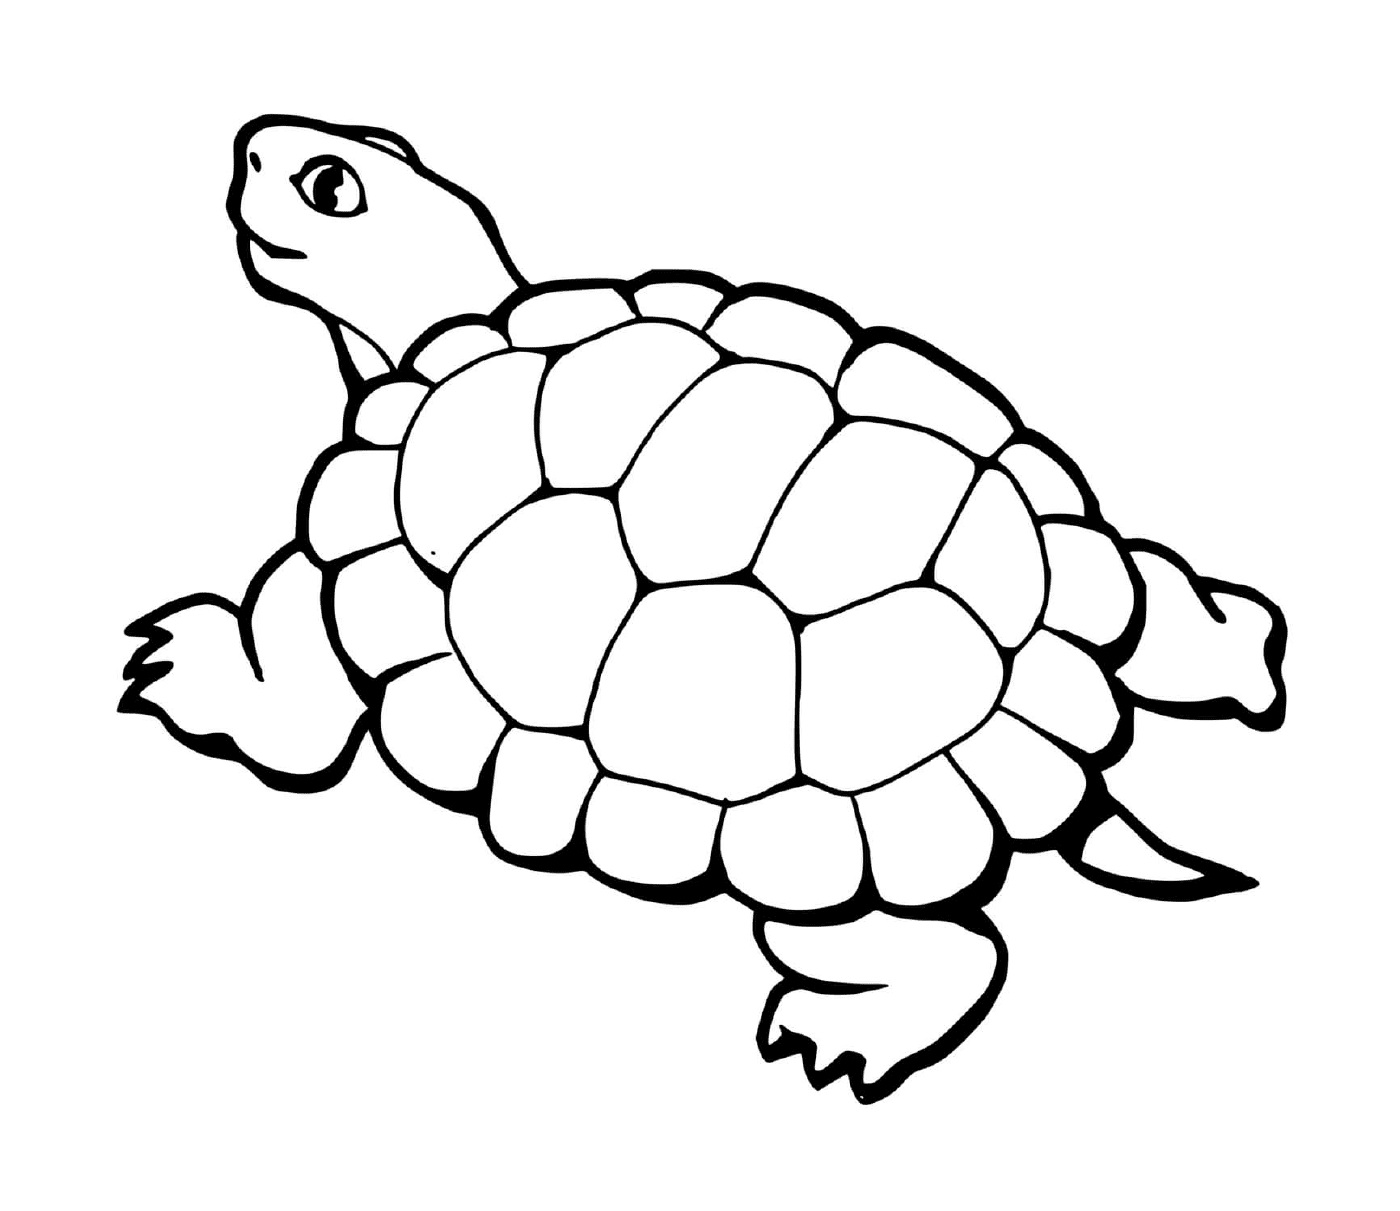  Turtle with tail 